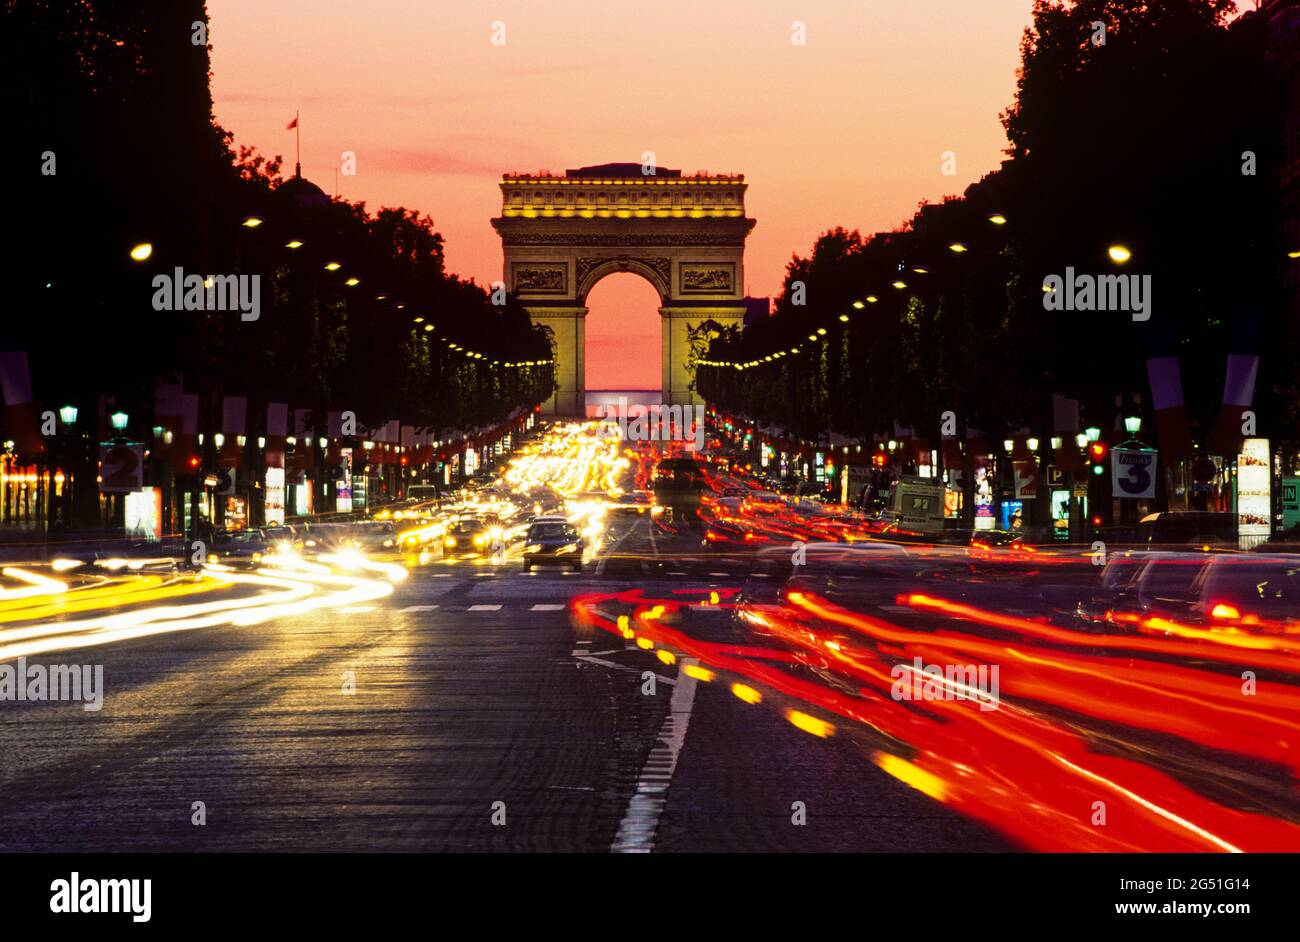 View of street at night with triumphal arch behind, Paris, France Stock Photo